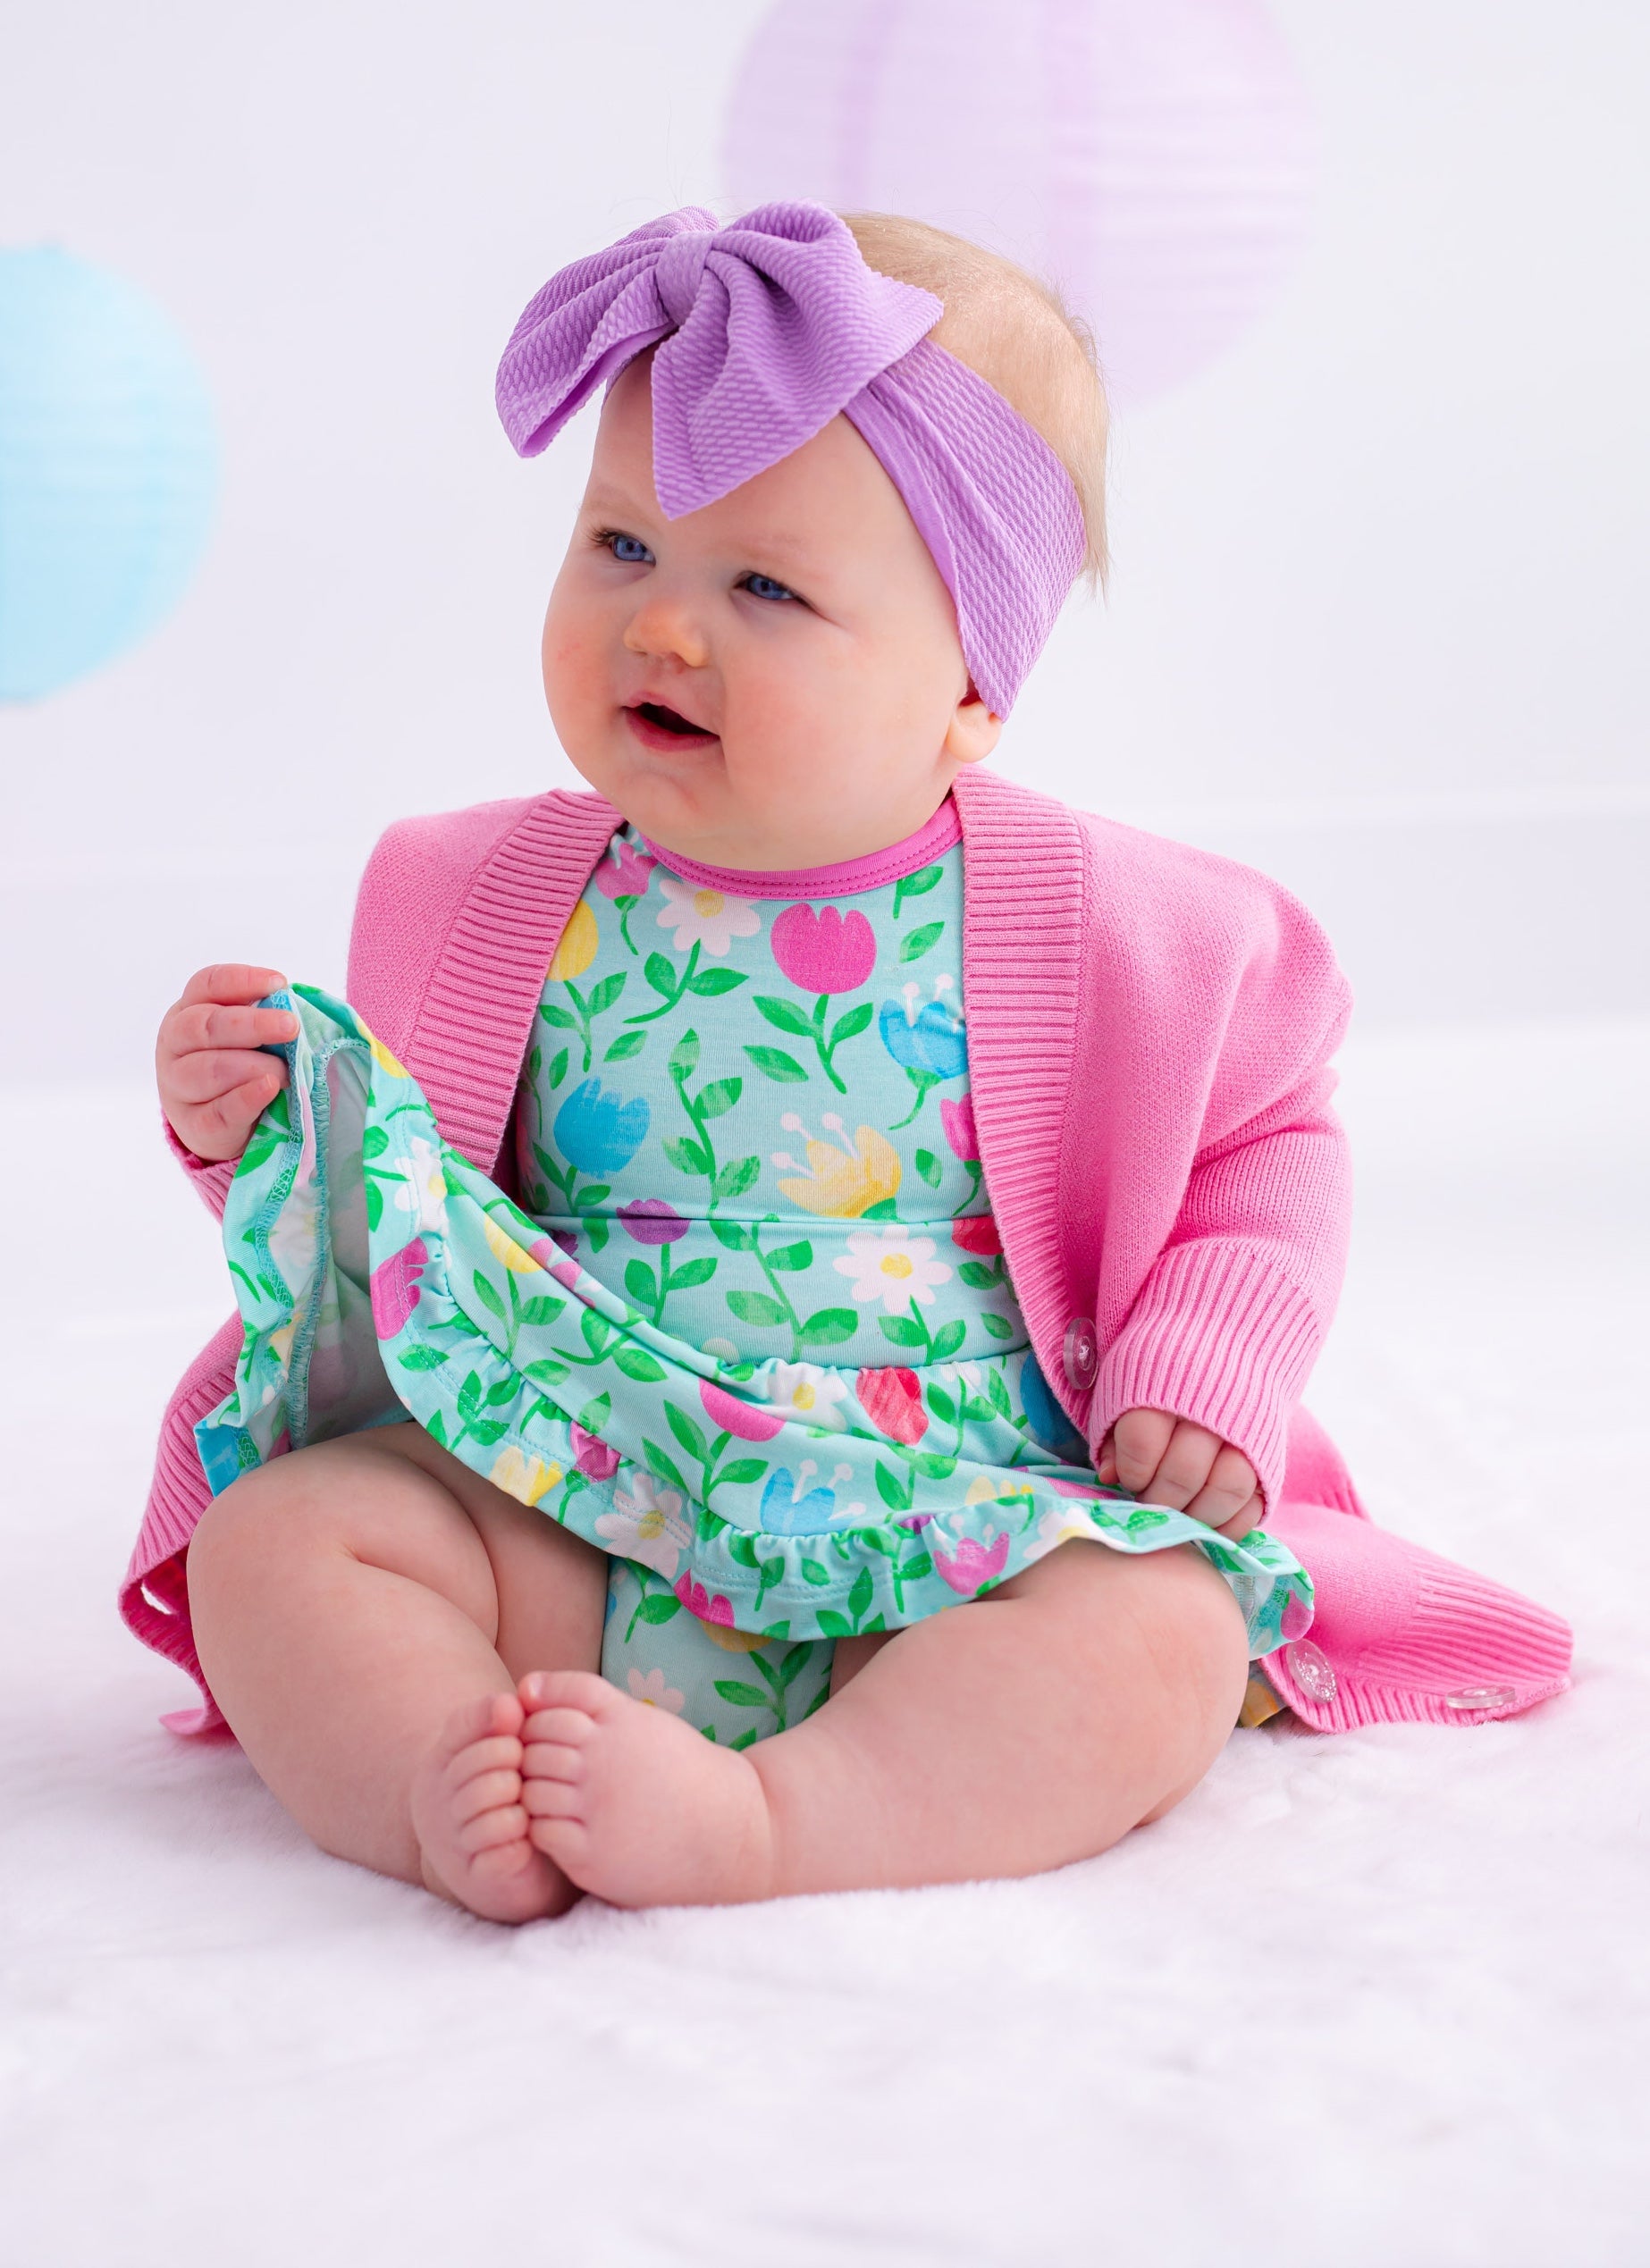 Discover Hypoallergenic and Durable Kids' Clothing